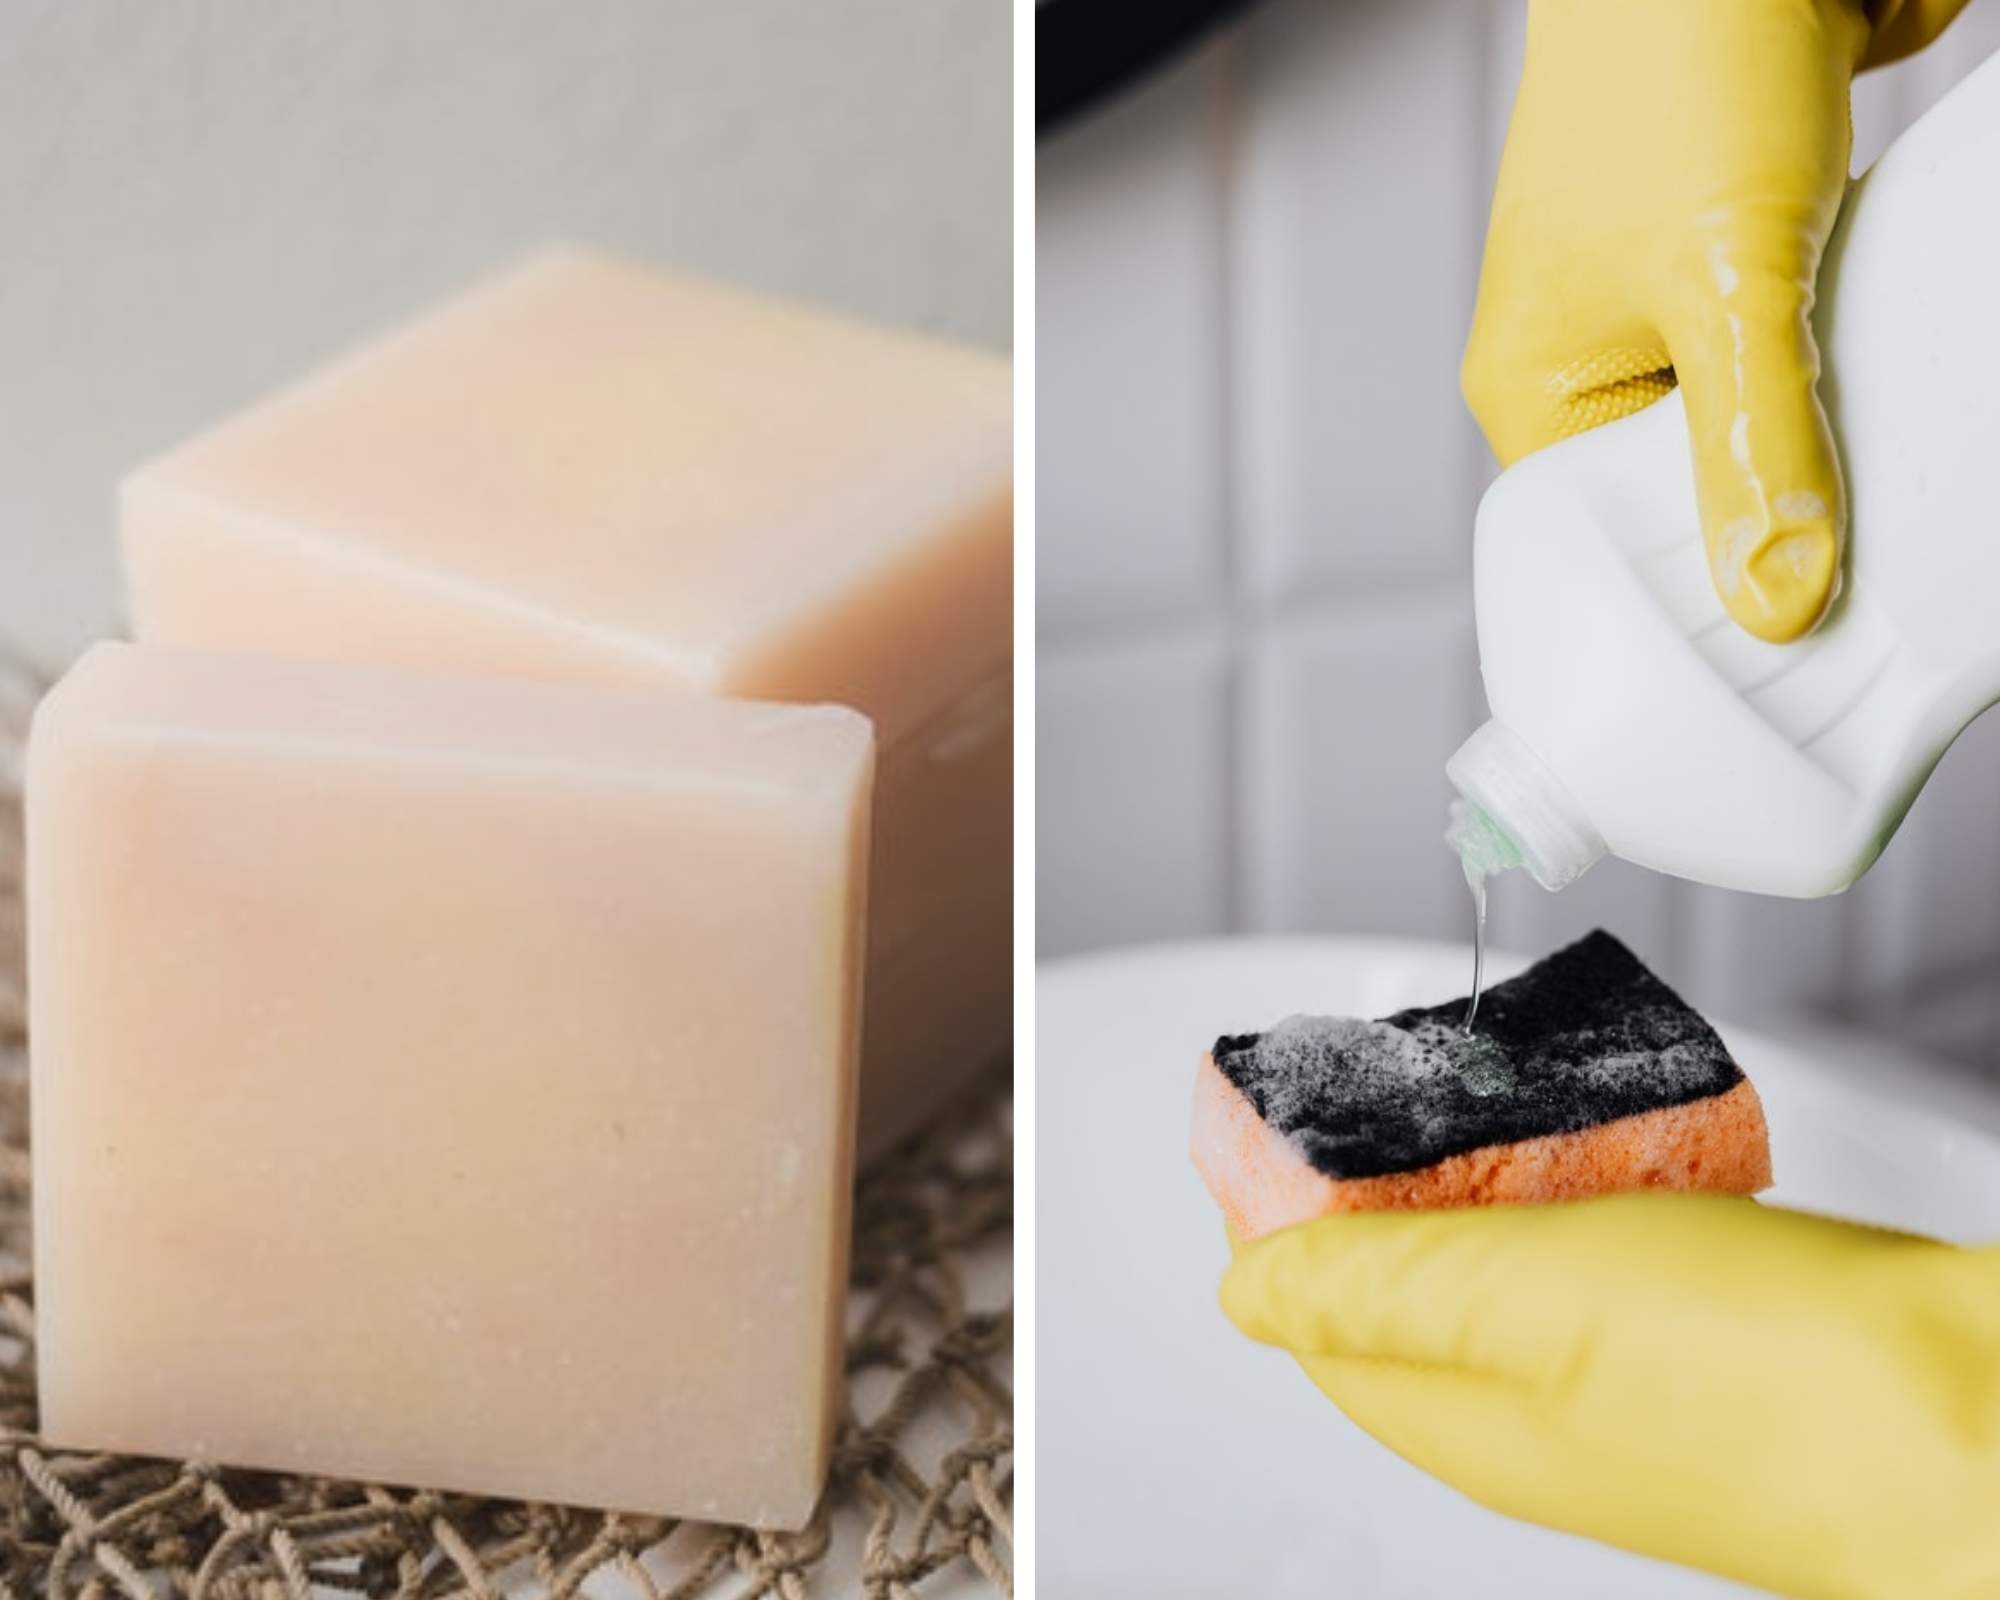 Know All About Cold Wax: How To Use, Benefits, And Drawbacks